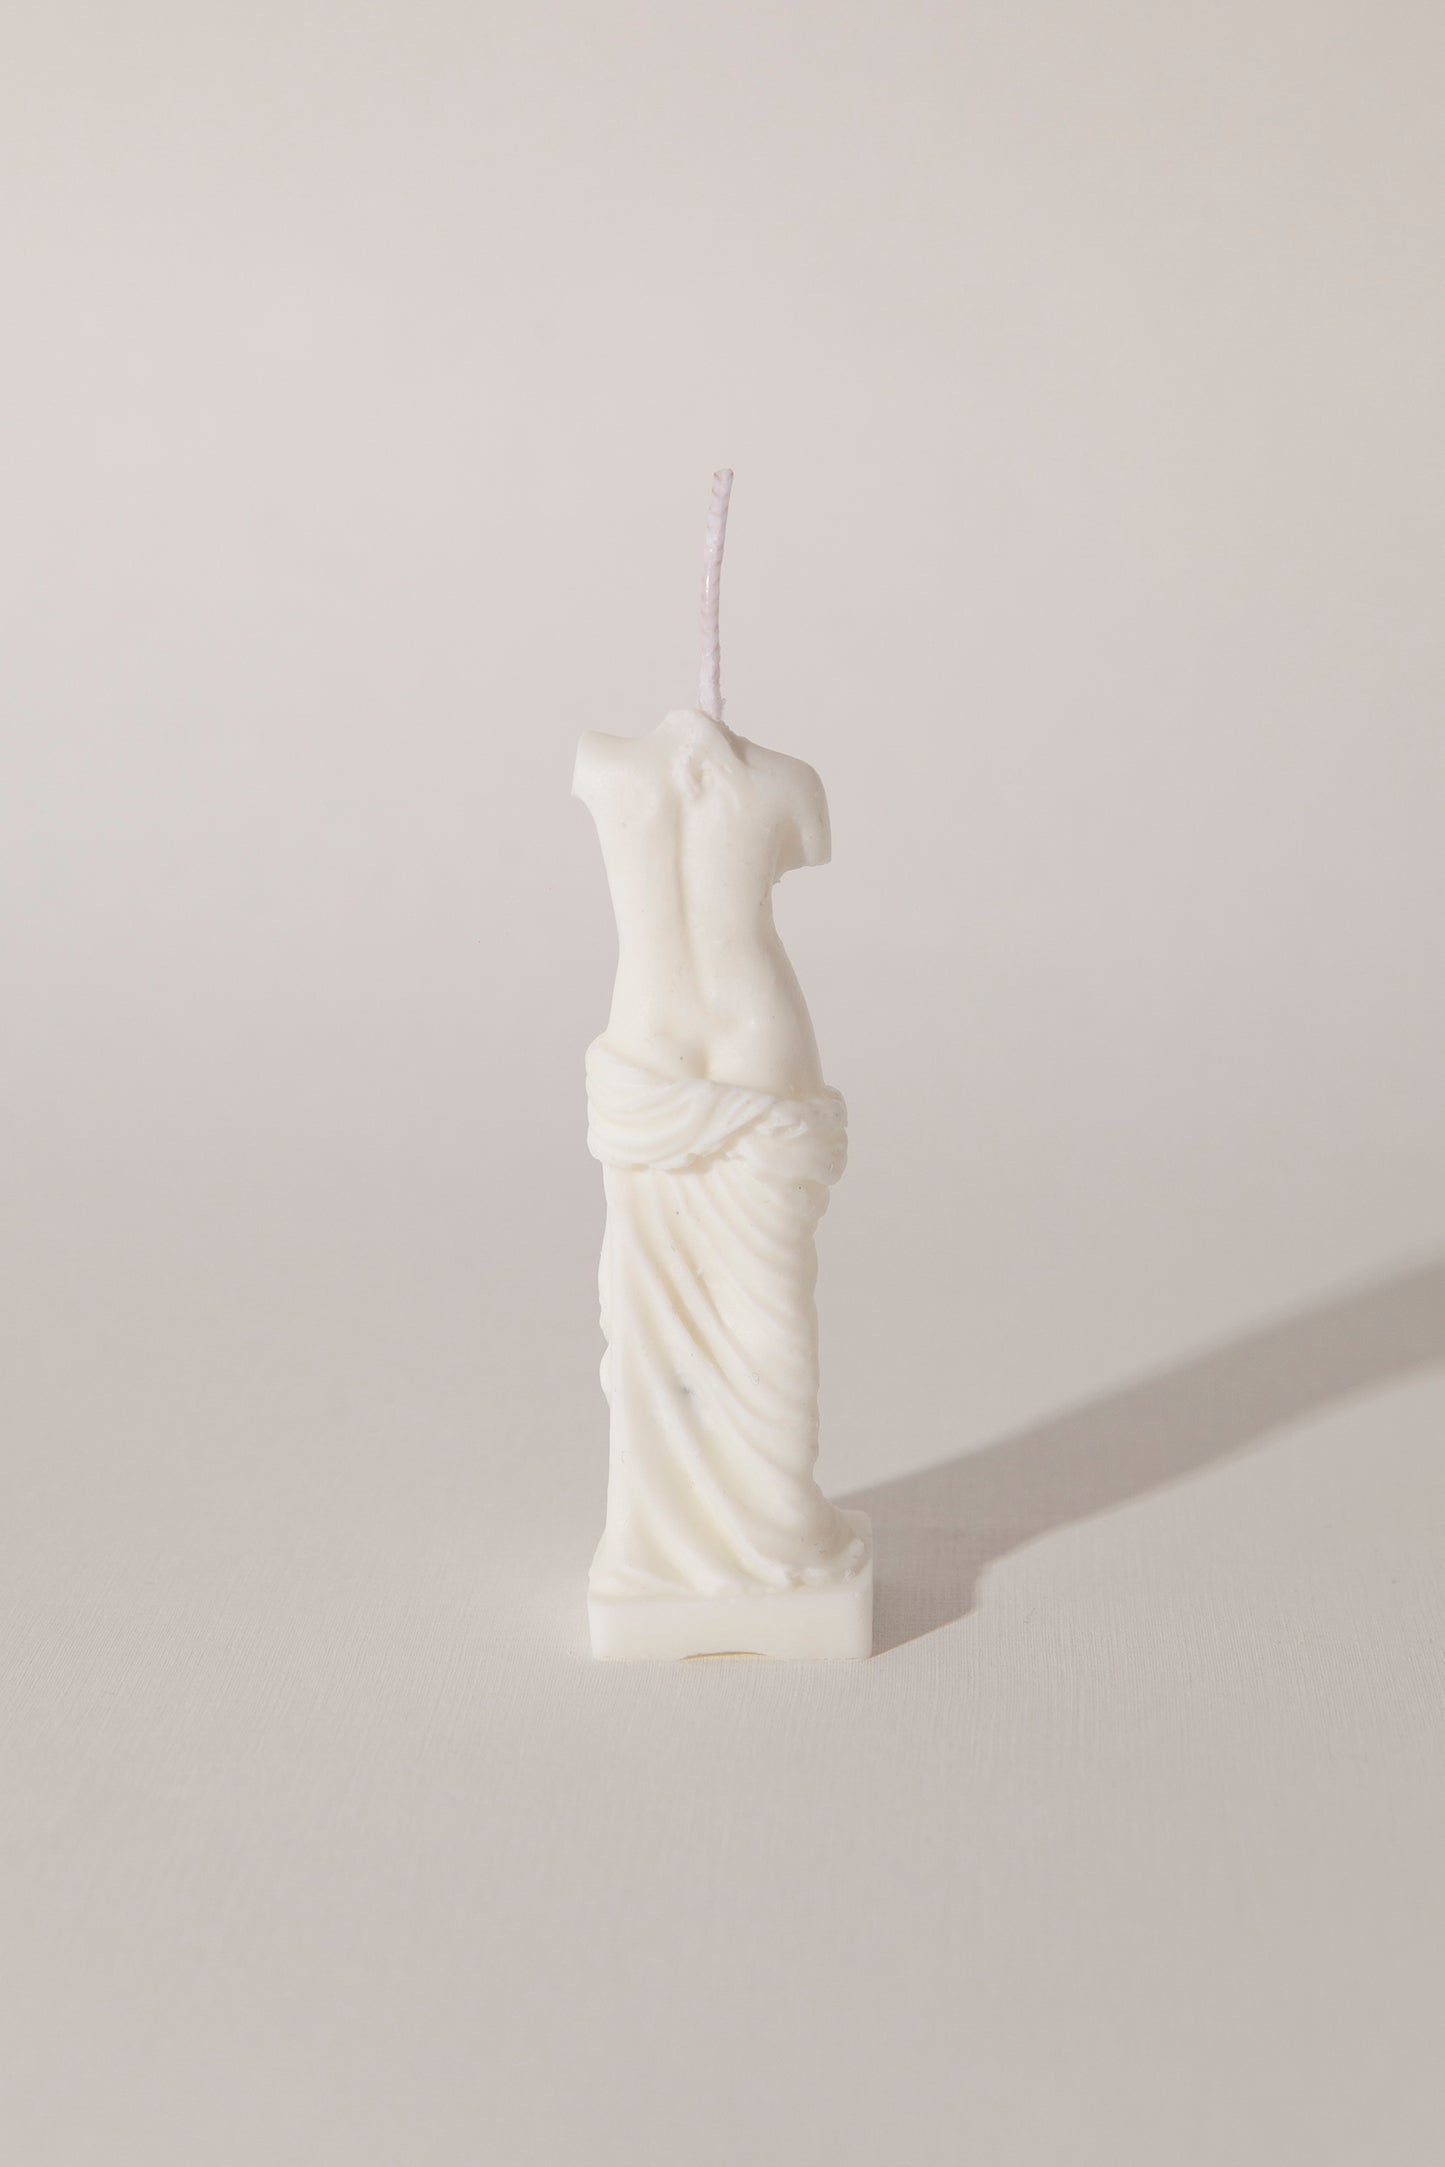 The Sculpted Candles